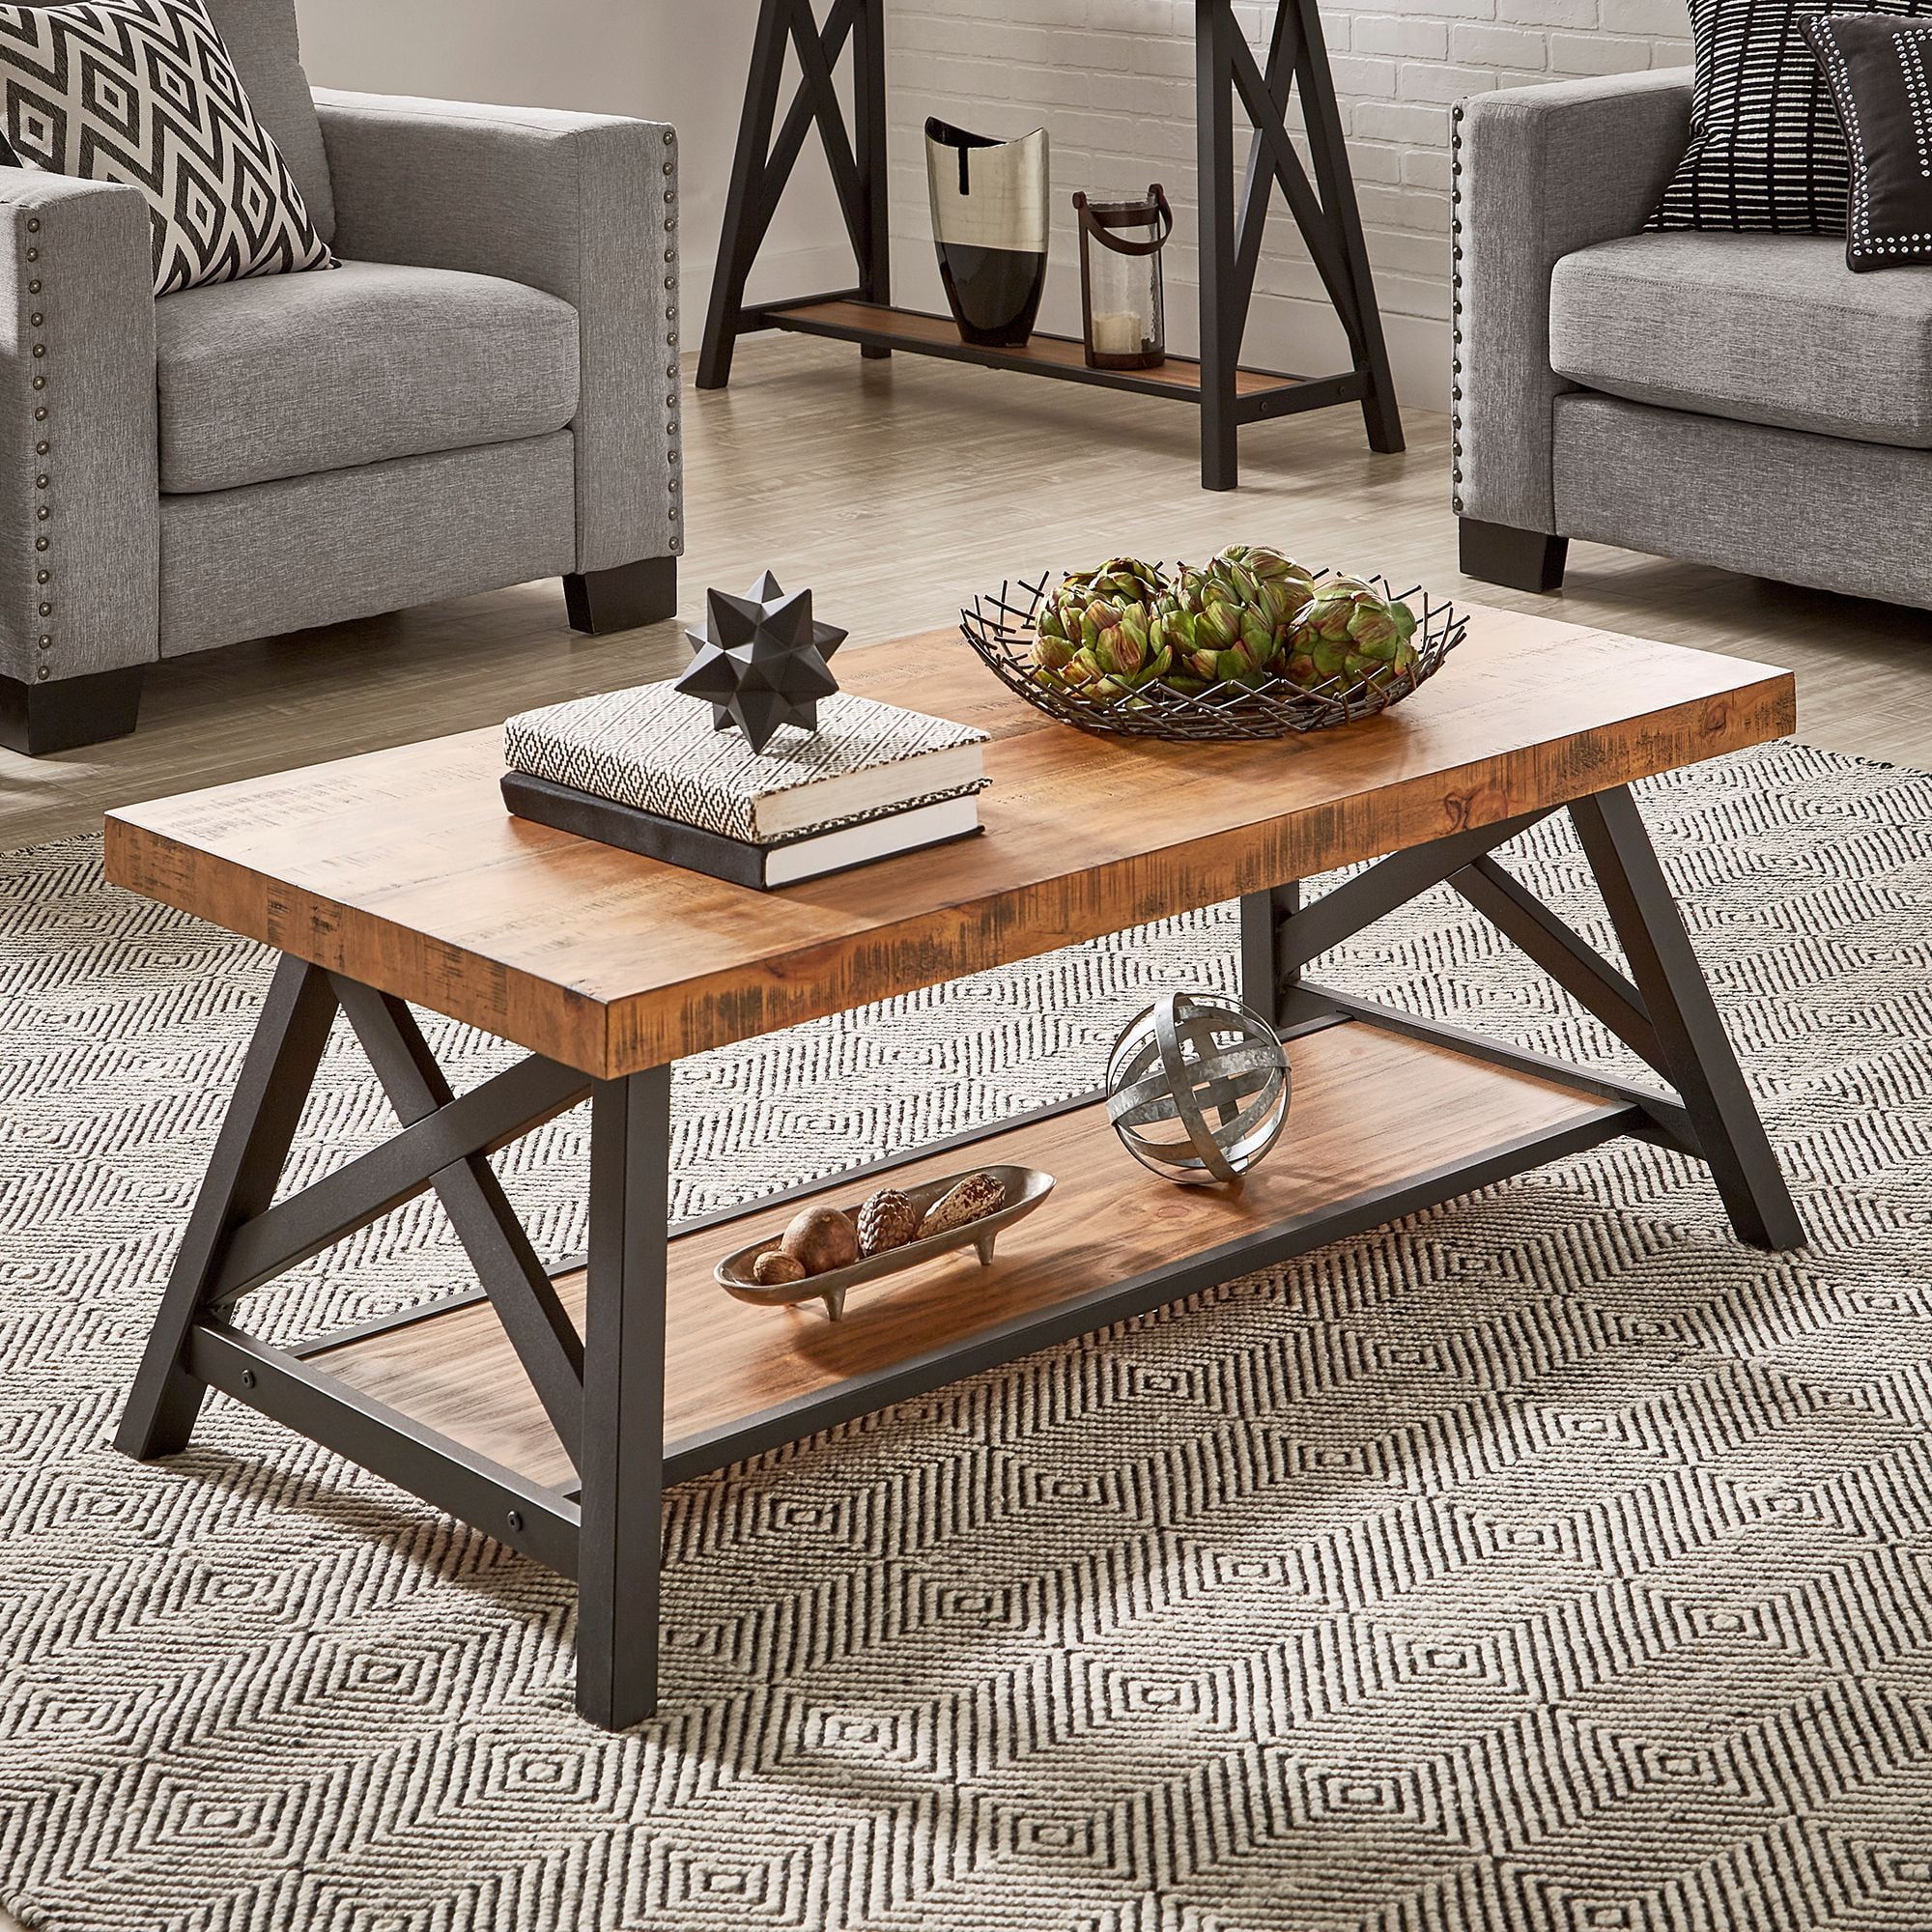 Weston Home Westyn Rustic X Base Wood Rectangular Coffee Table, Gray –  Walmart Throughout Rectangular Coffee Tables With Pedestal Bases (View 11 of 15)